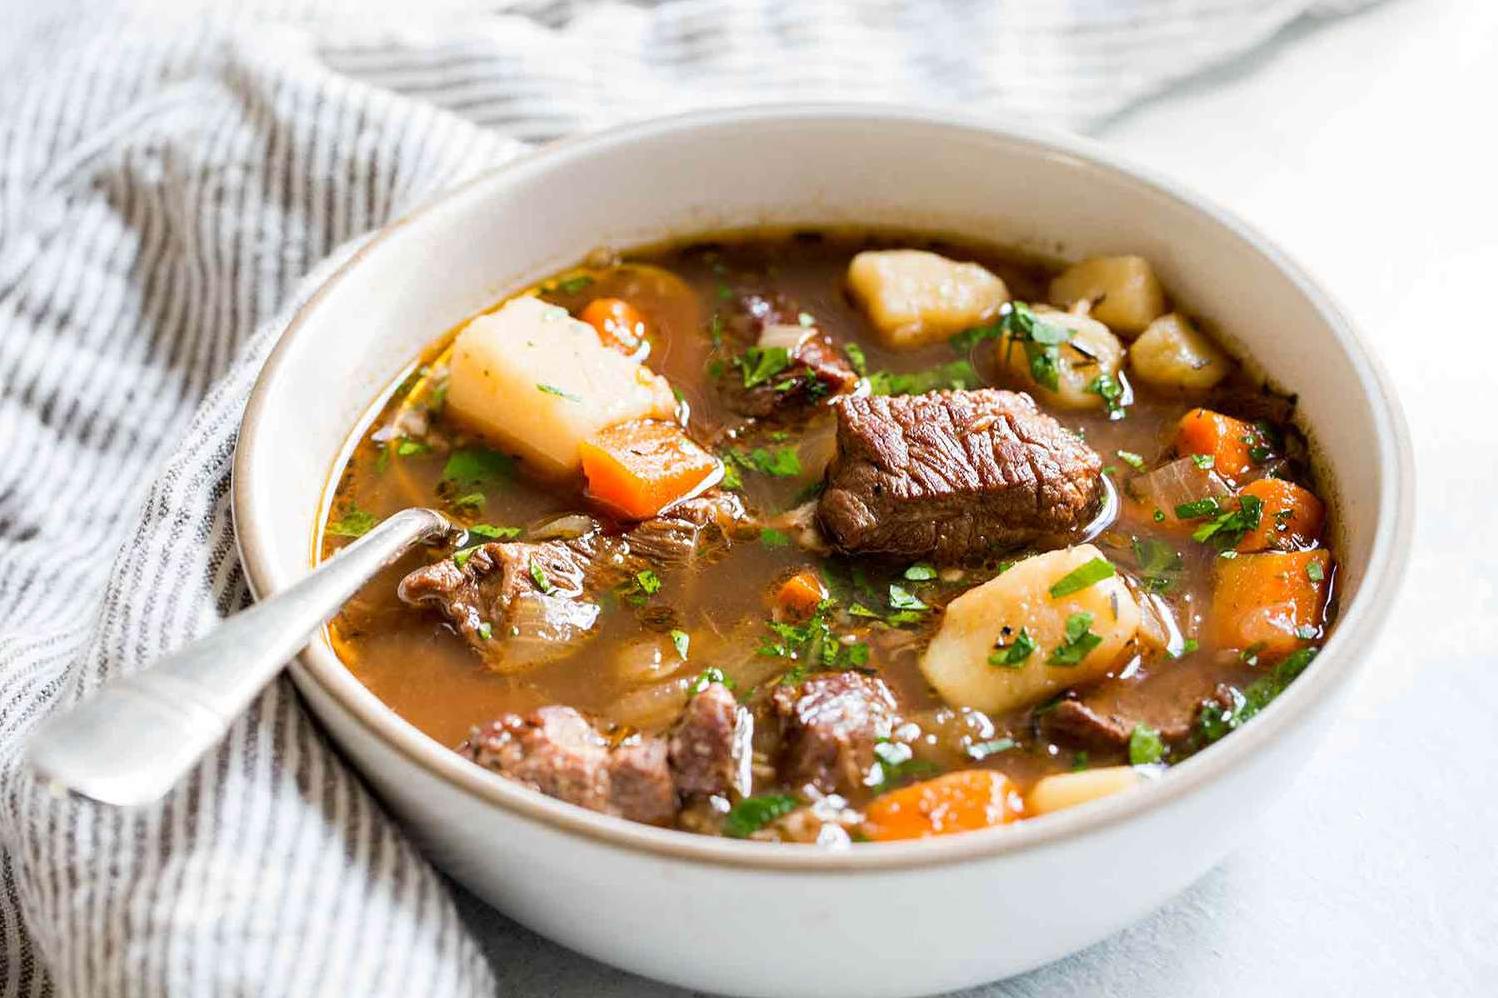  This Irish stew is the perfect way to warm up on a cold day.